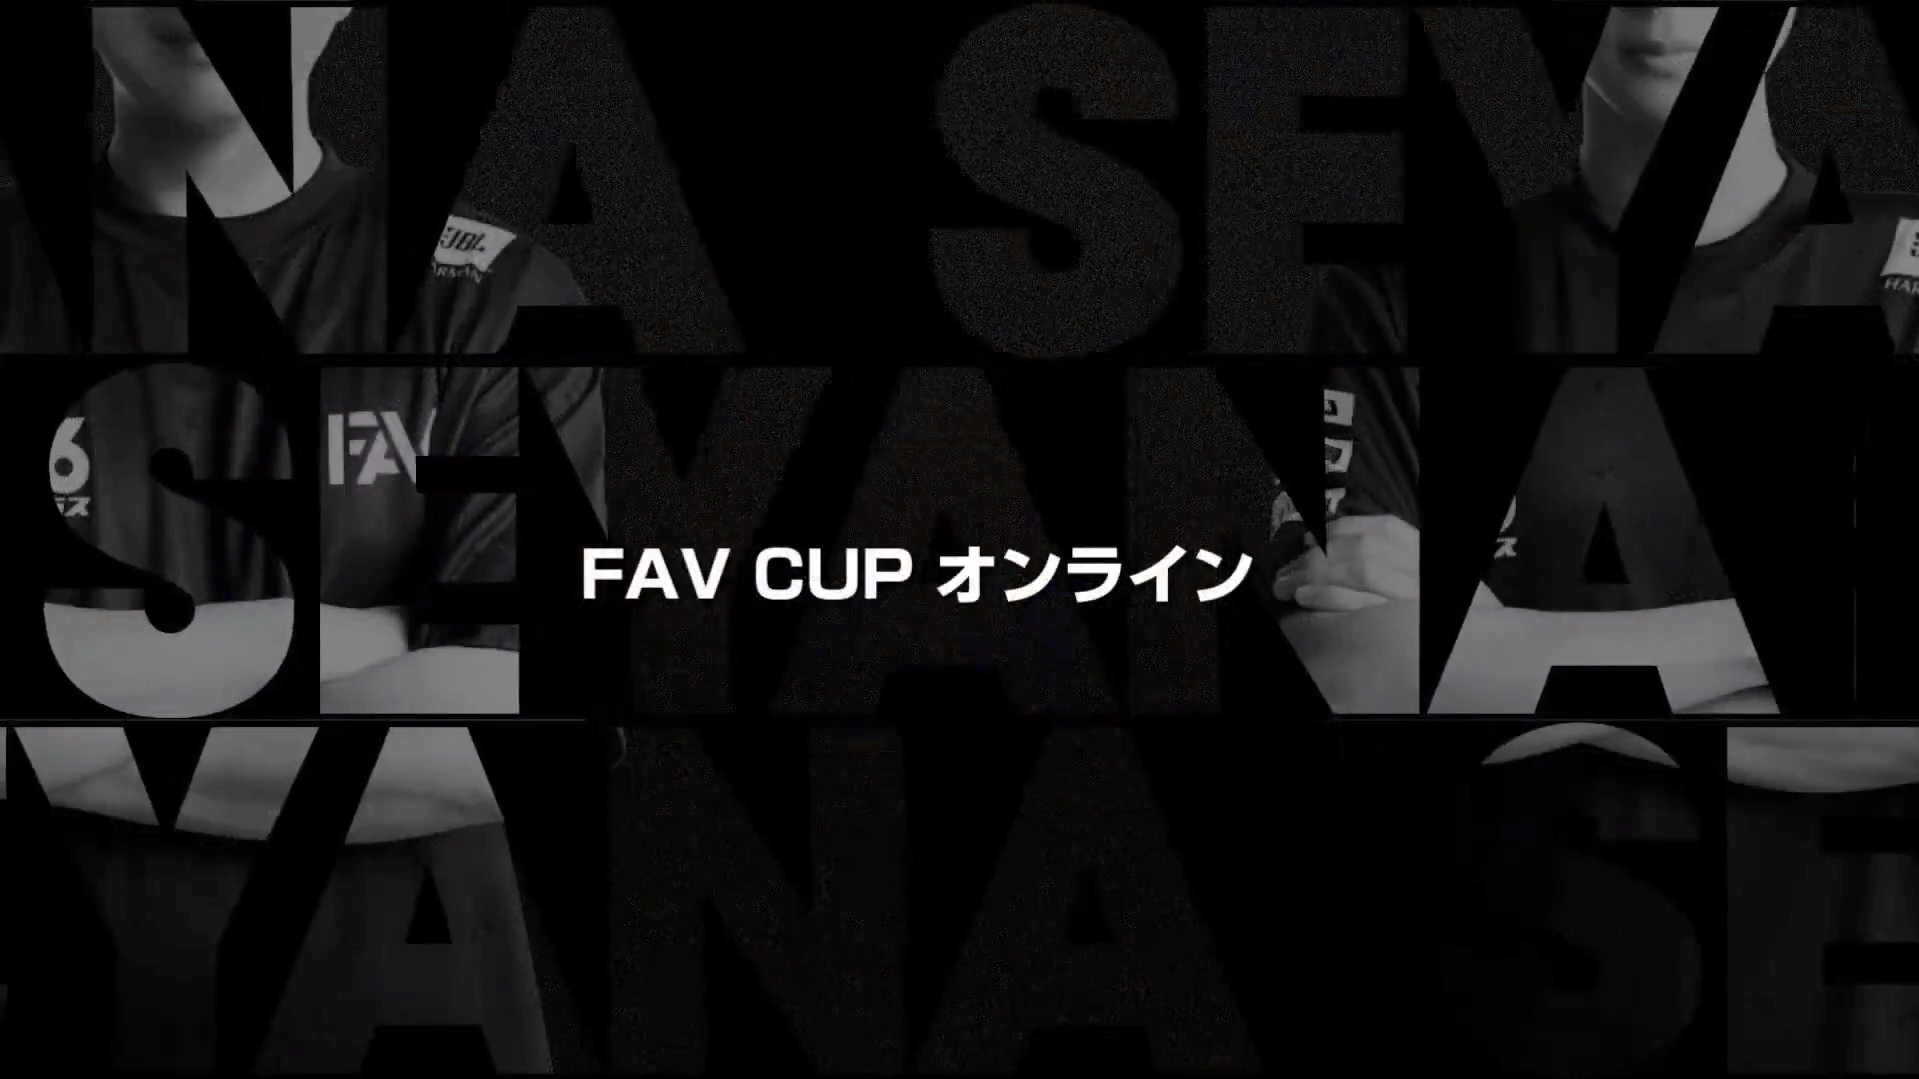 Yossan Wins FAVCUP Online 2021